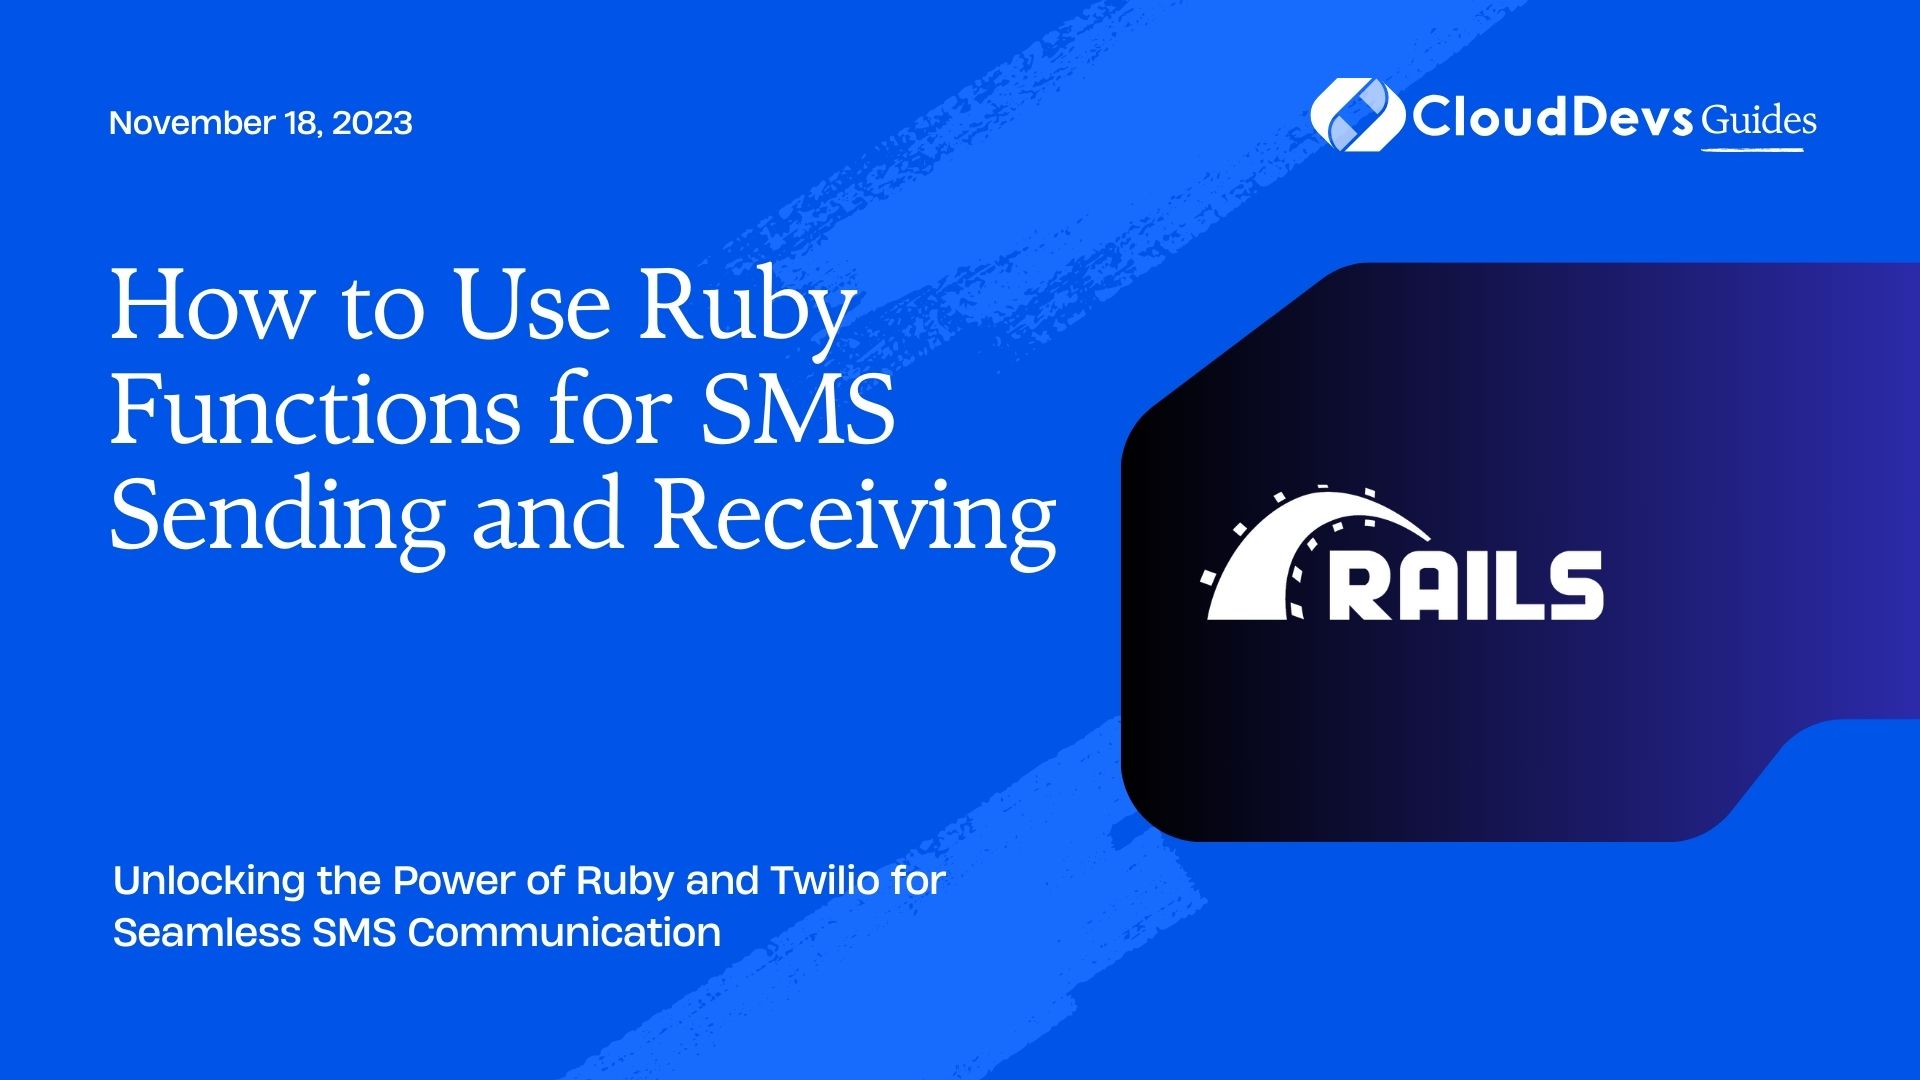 How to Use Ruby Functions for SMS Sending and Receiving